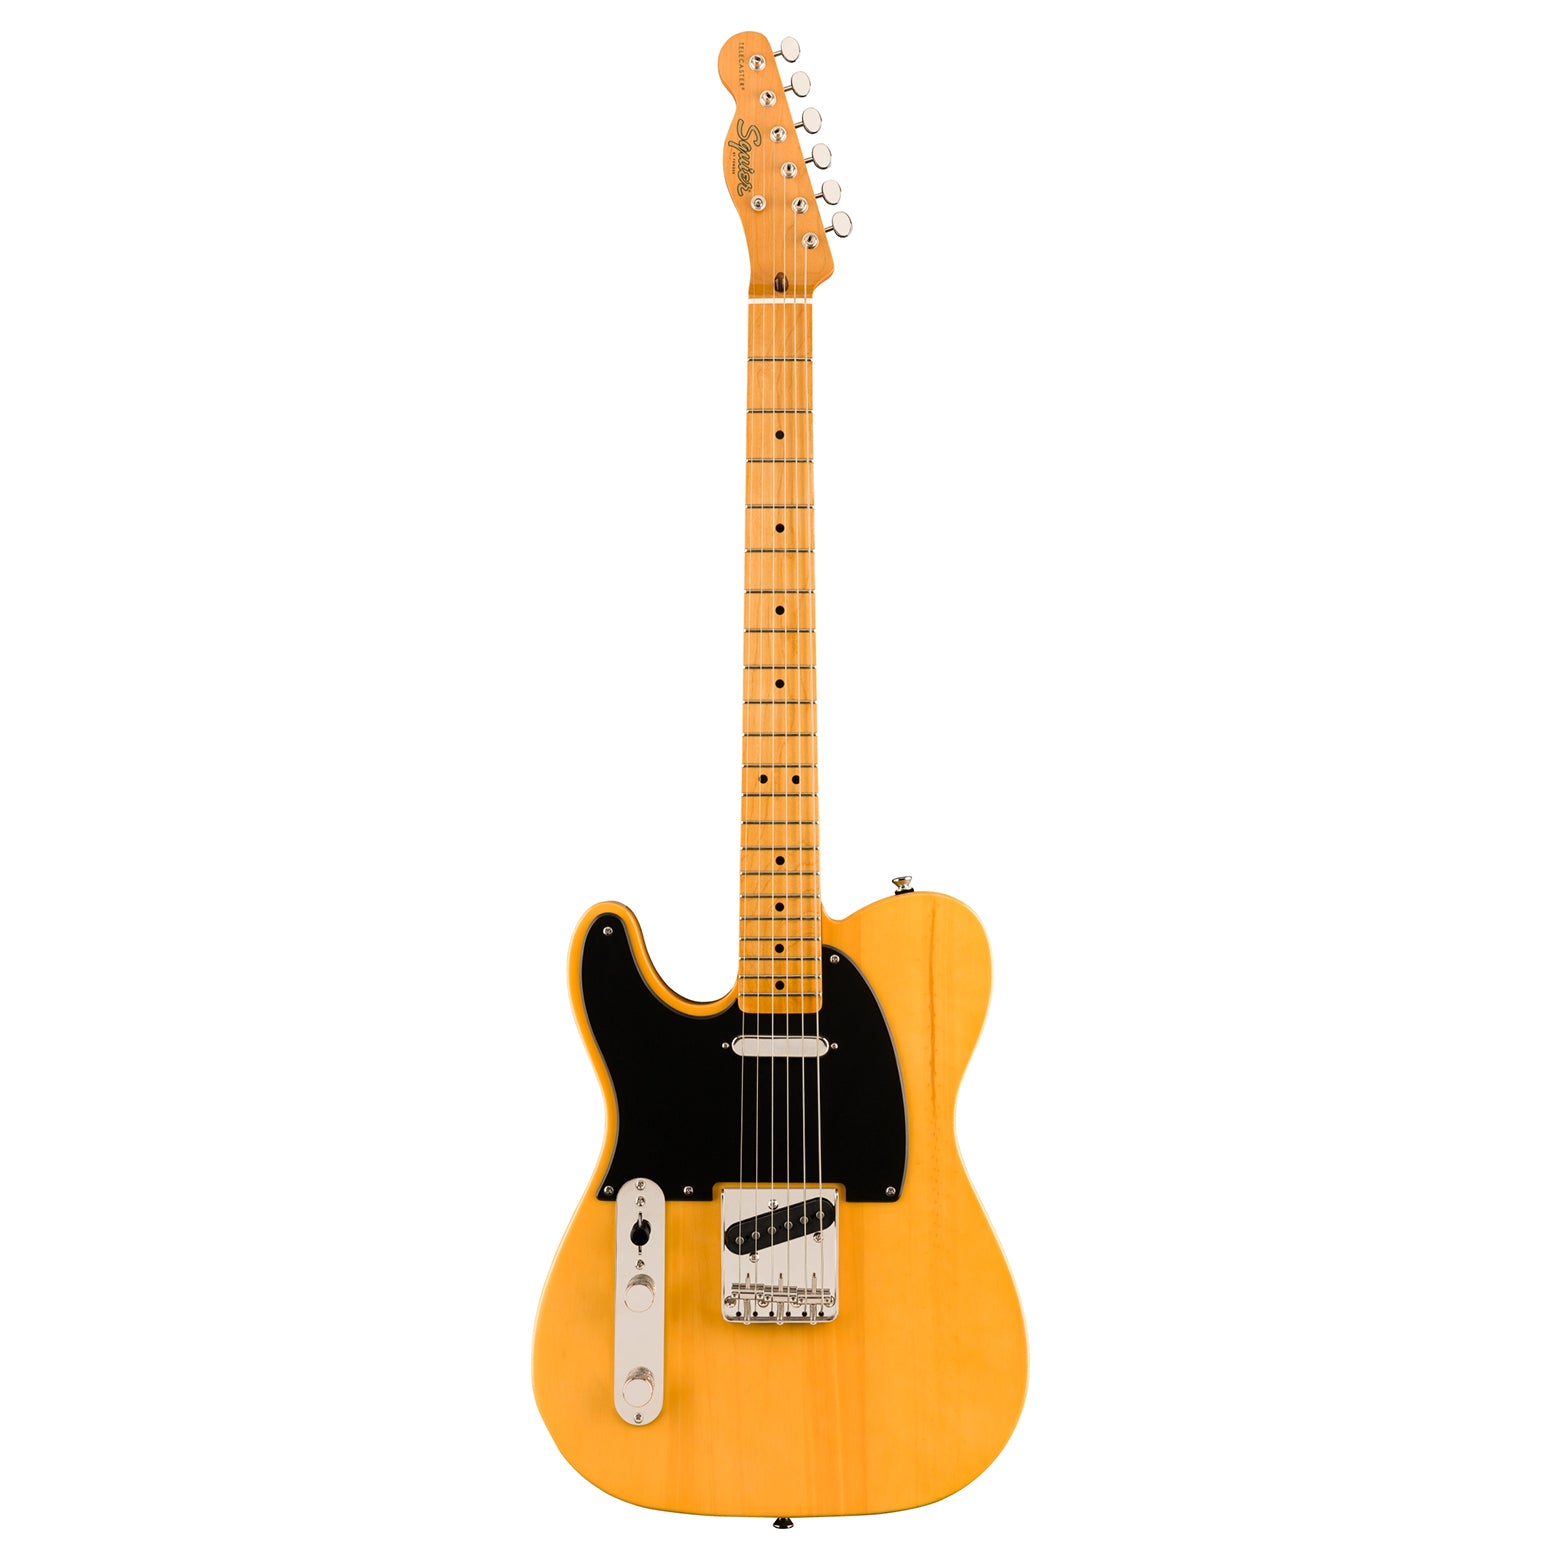 Squier by Fender Classic Vibe '50s Telecaster Electric Guitar SS Vintage  Gloss with Single Coil Pickup, Nickel-Plated Hardware, 21 Frets